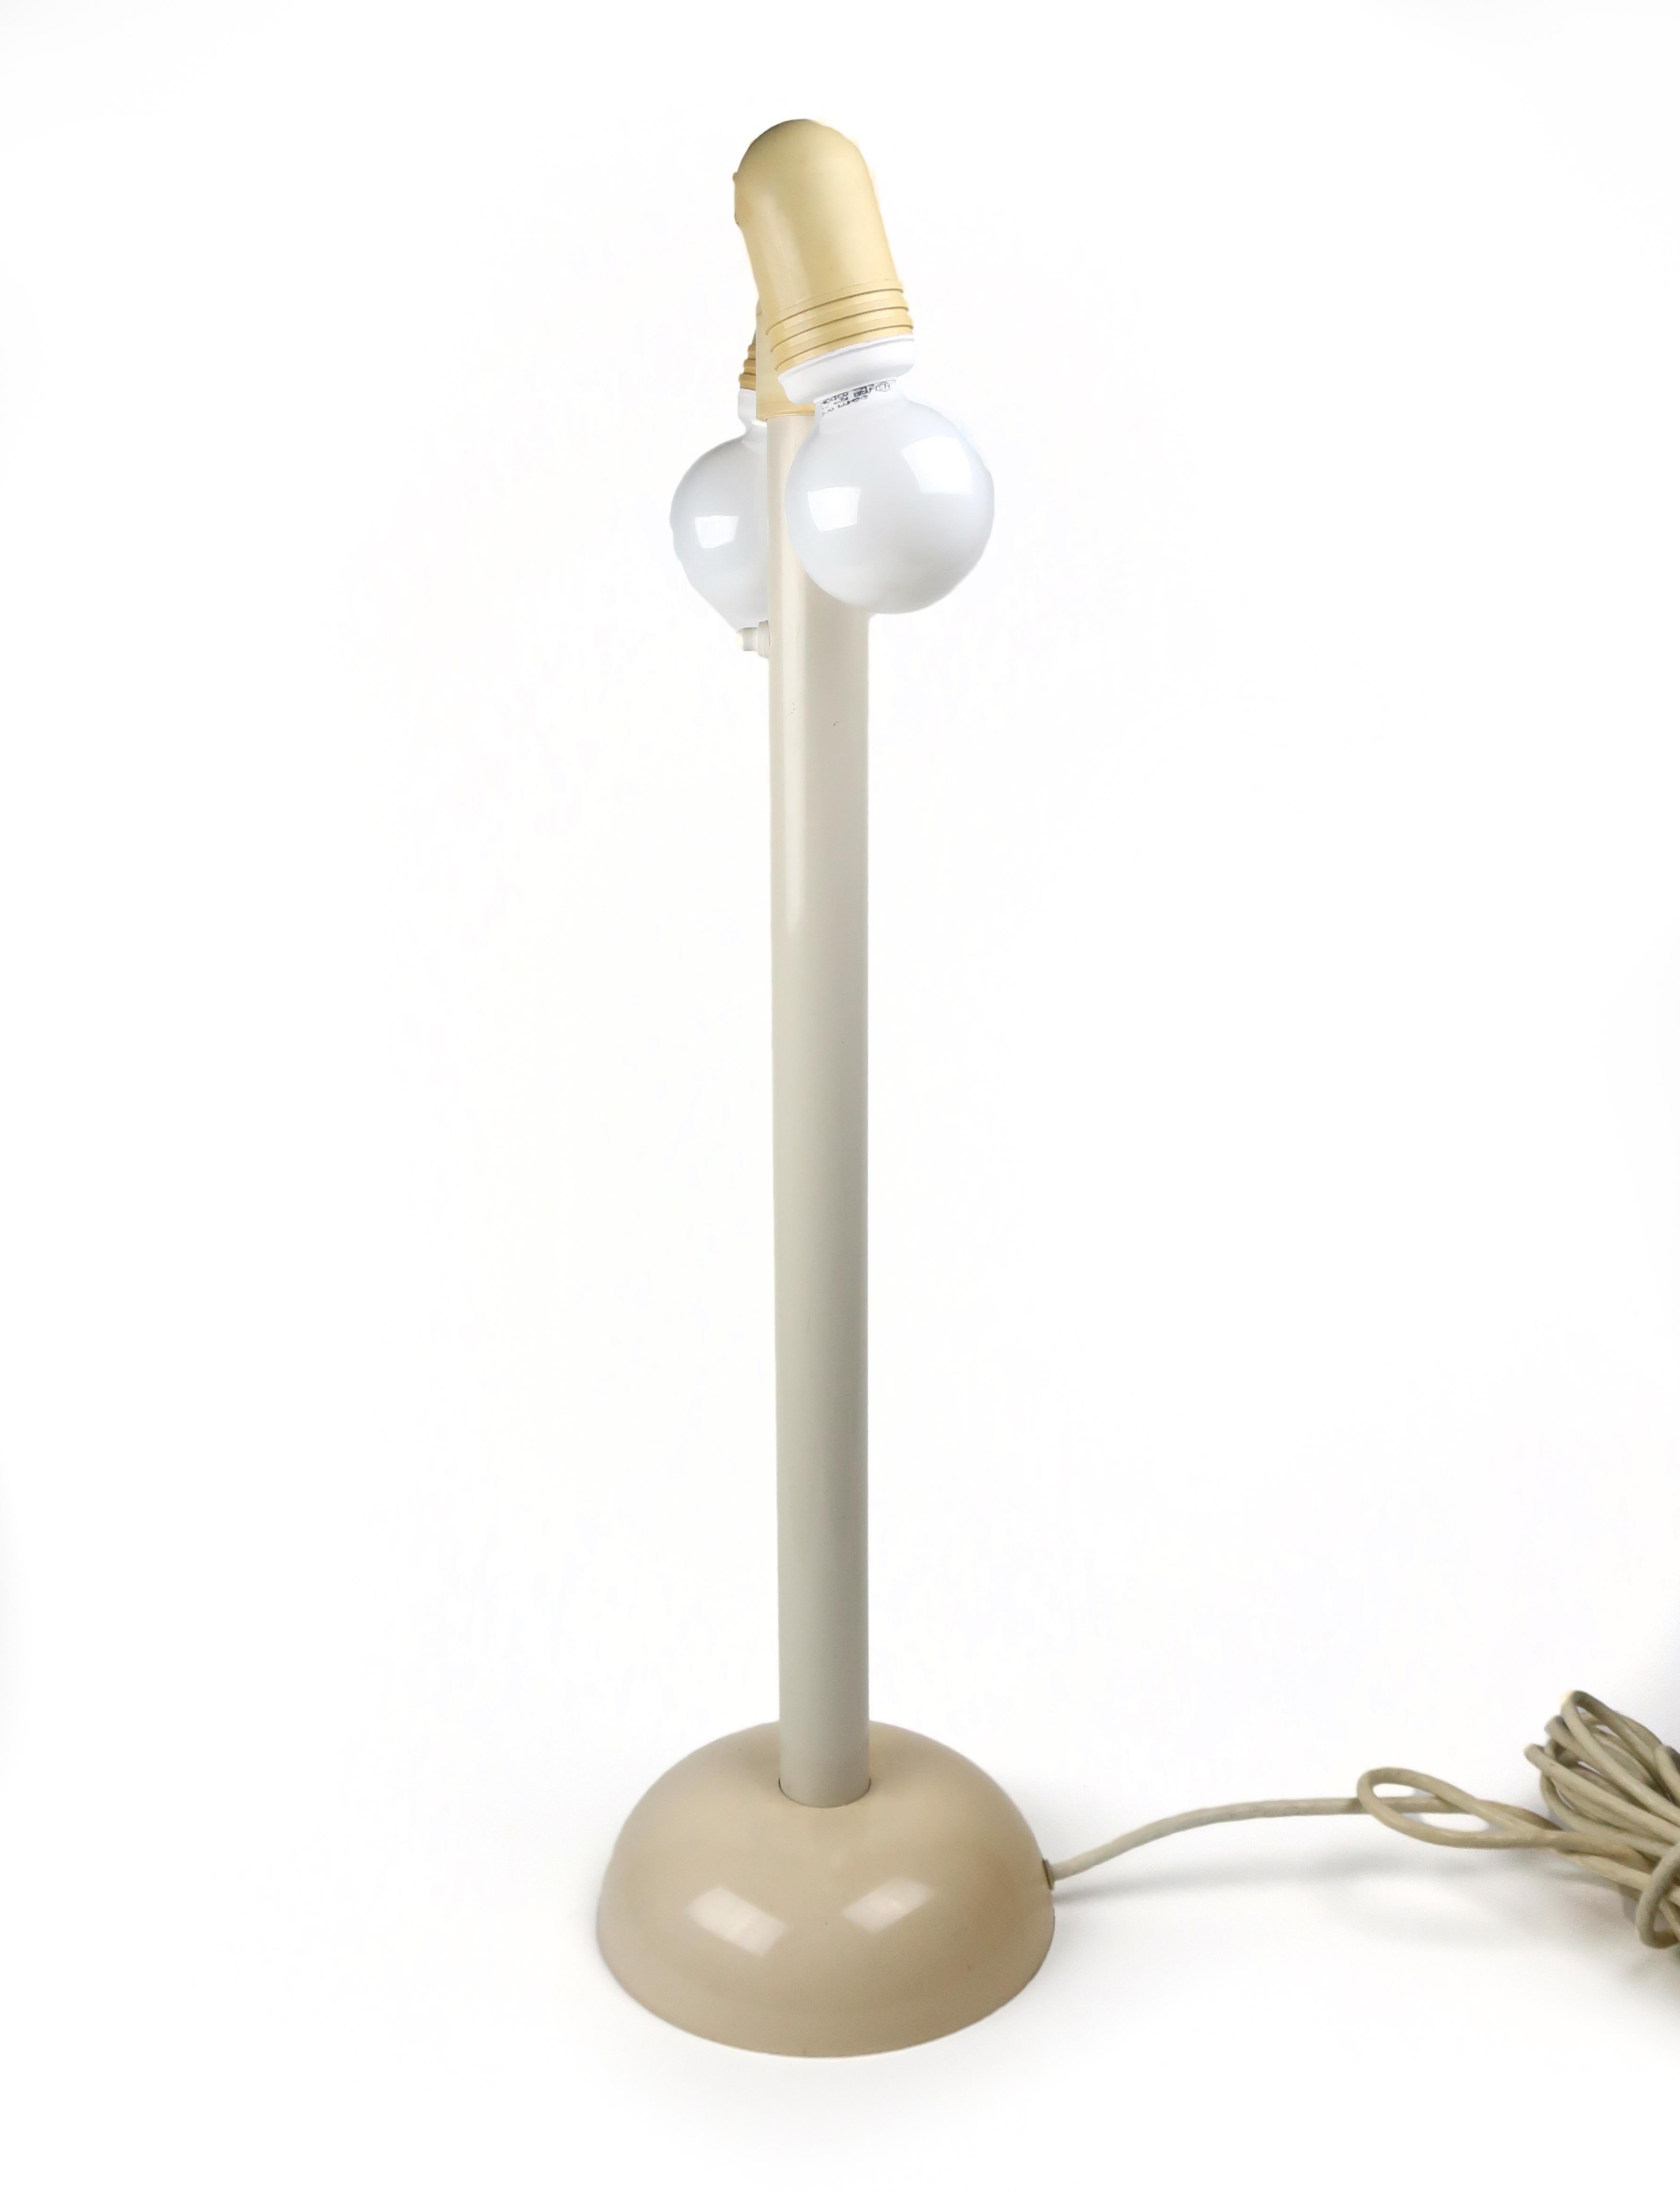 A great vintage table lamp designed for outdoor use but that also looks good inside In good vintage condition with a few marks on the base, but looks great and works perfectly, especially with a pair of globe bulbs. Marked: Olympia Lighting